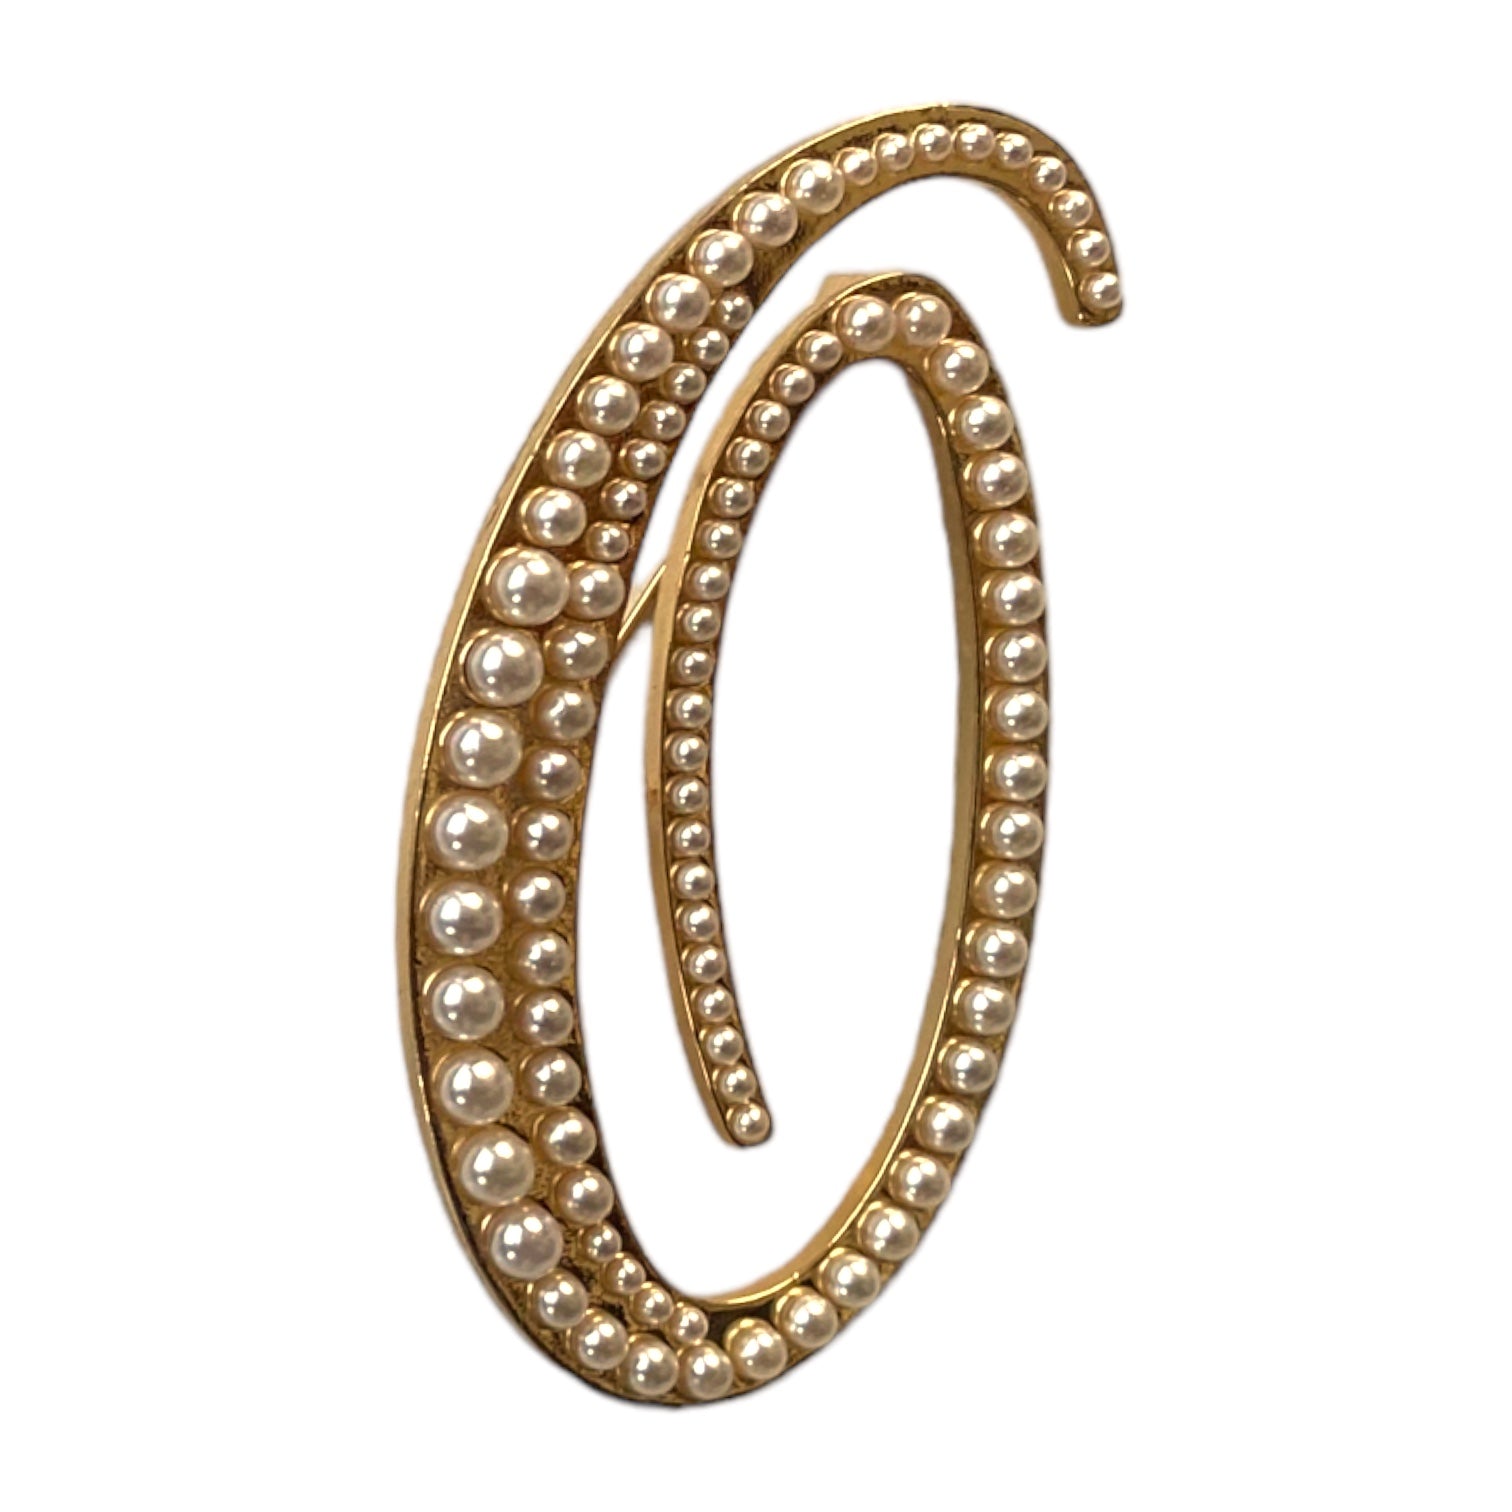 Pearled Letter “O” Brooch